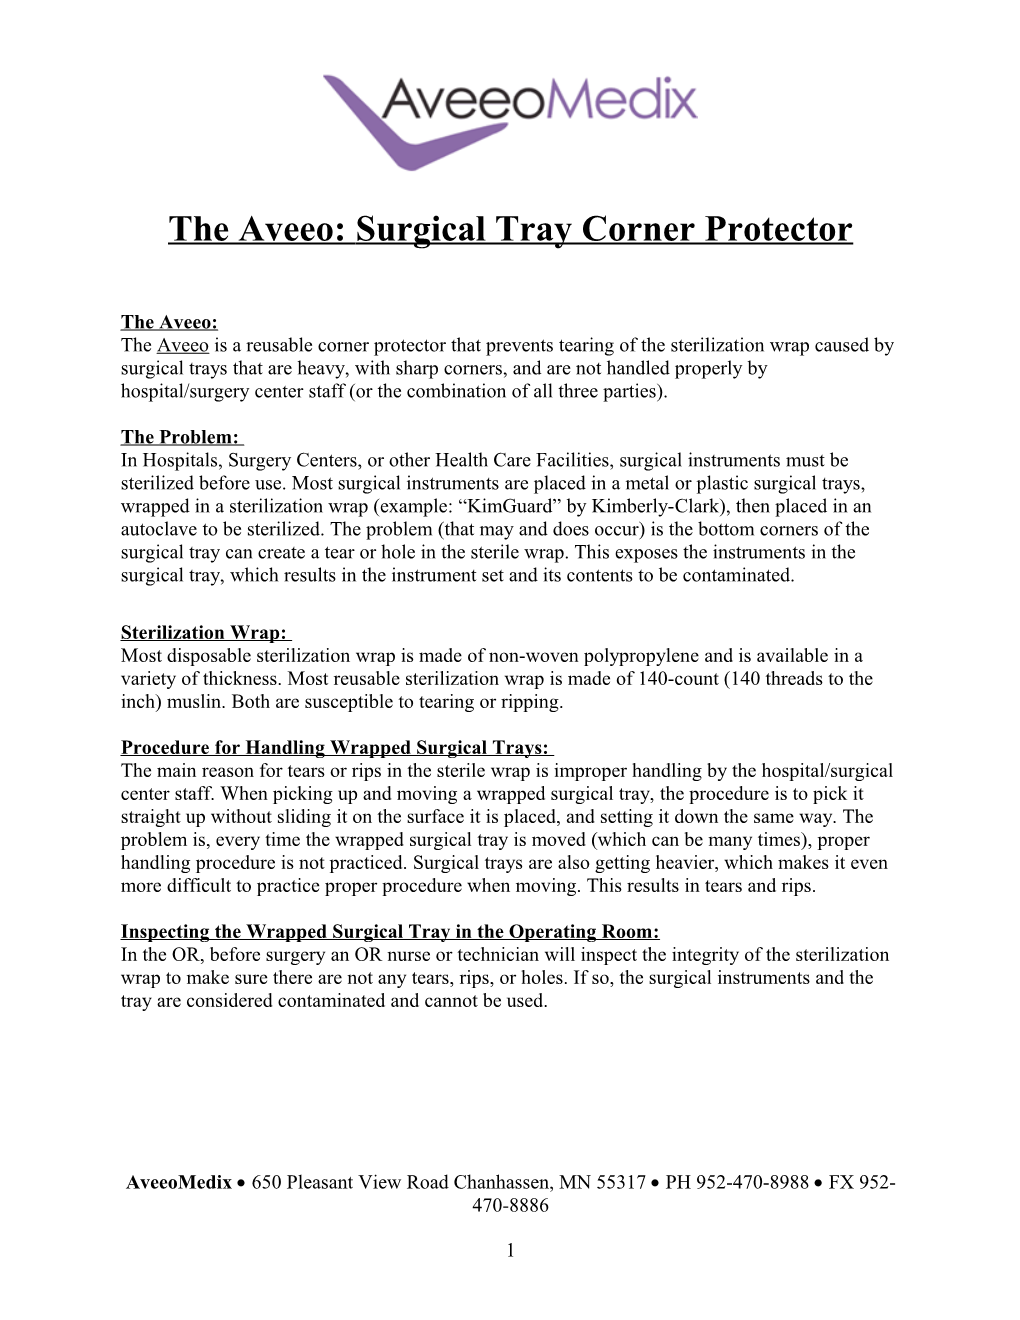 The Aveeo: Surgical Tray Corner Protector